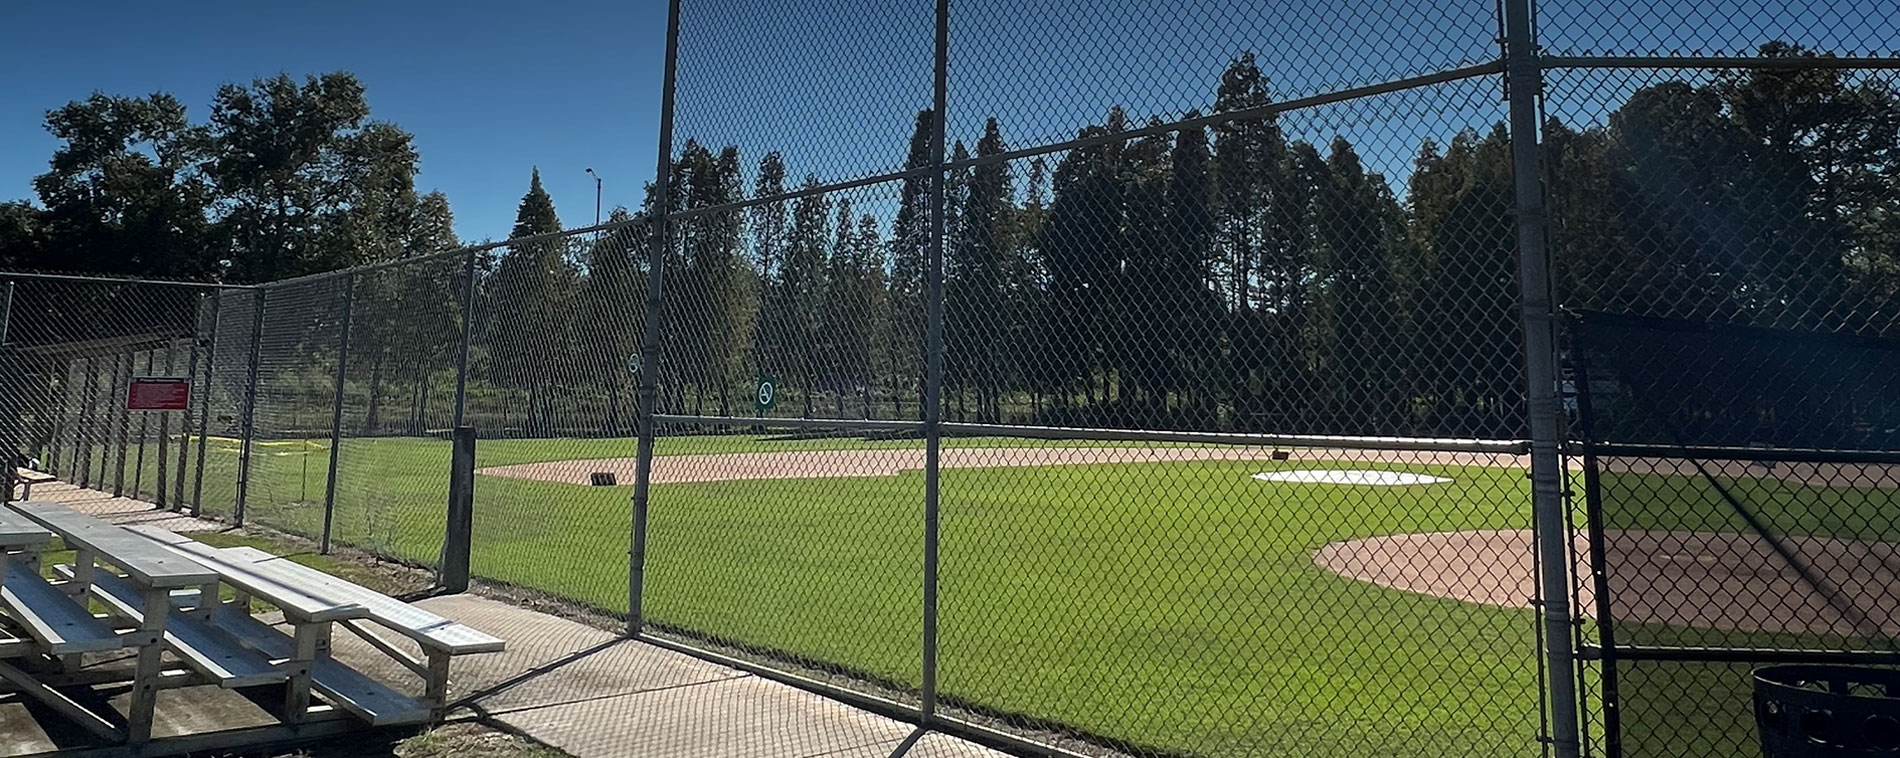 Home page header image or fence with baseball field in the background